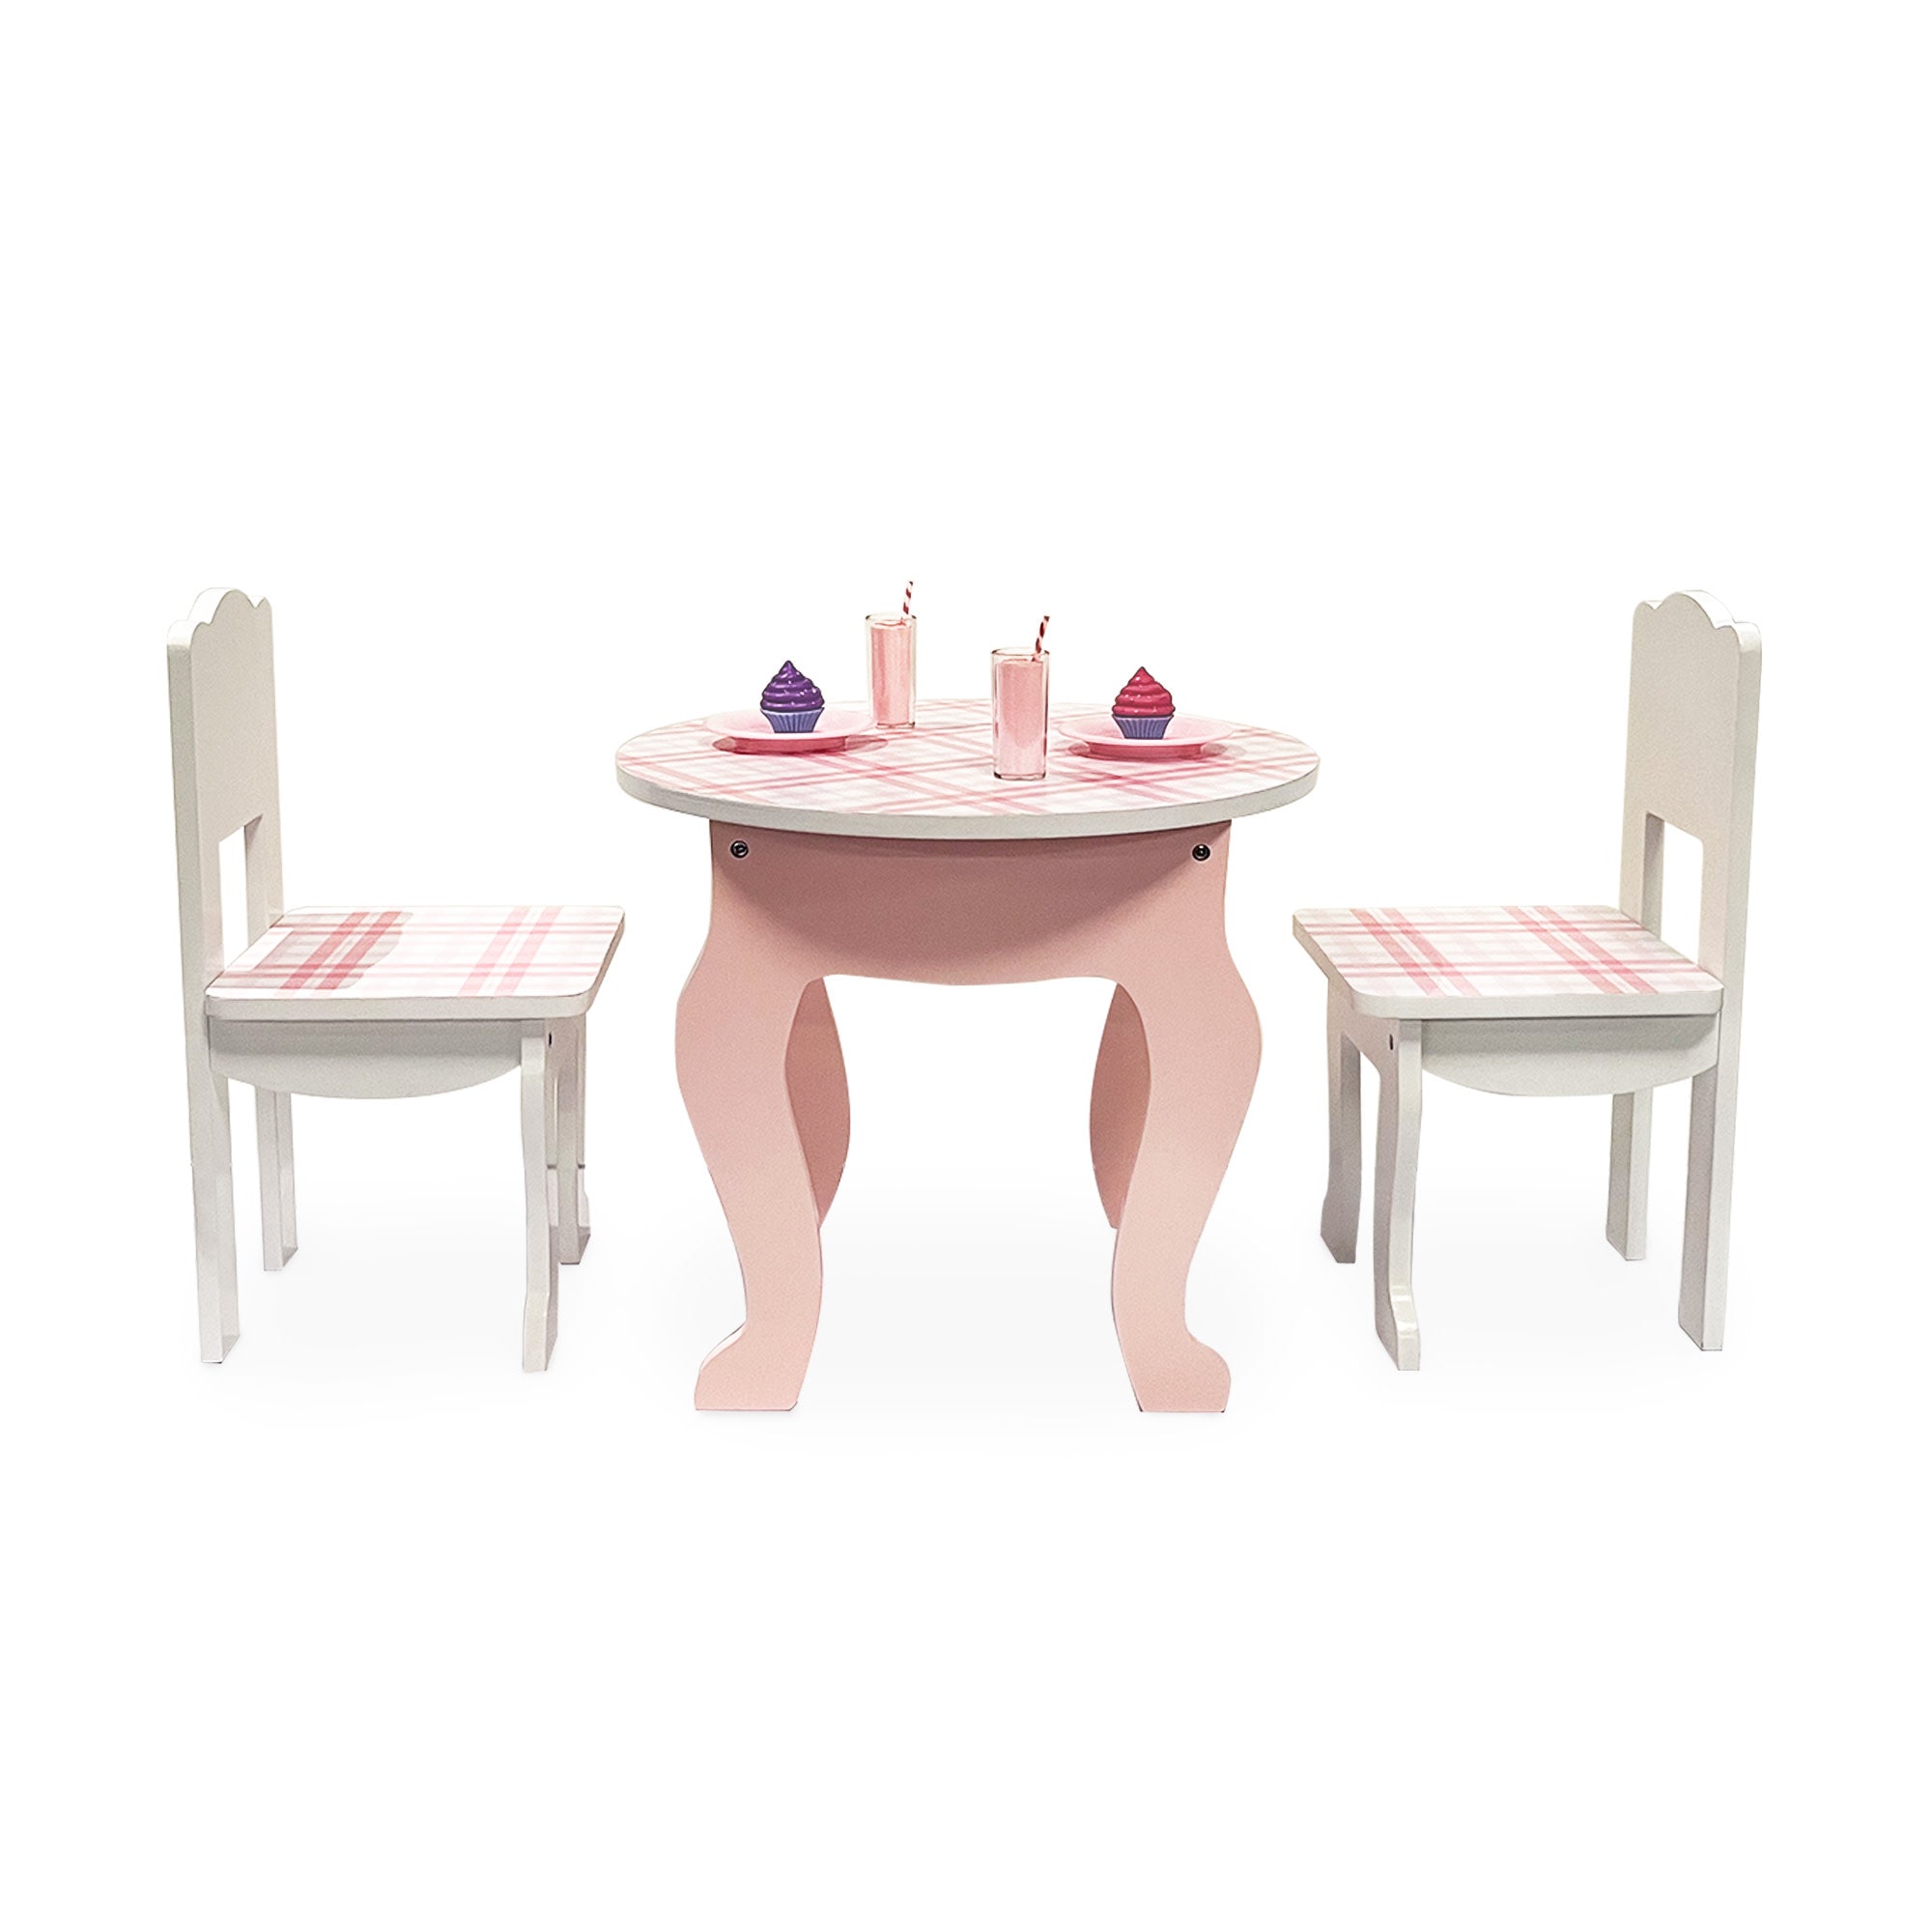 Sophia's Aurora Princess Decorative Table & Chairs Set with Desserts and Accessories for 18" Dolls, Pink